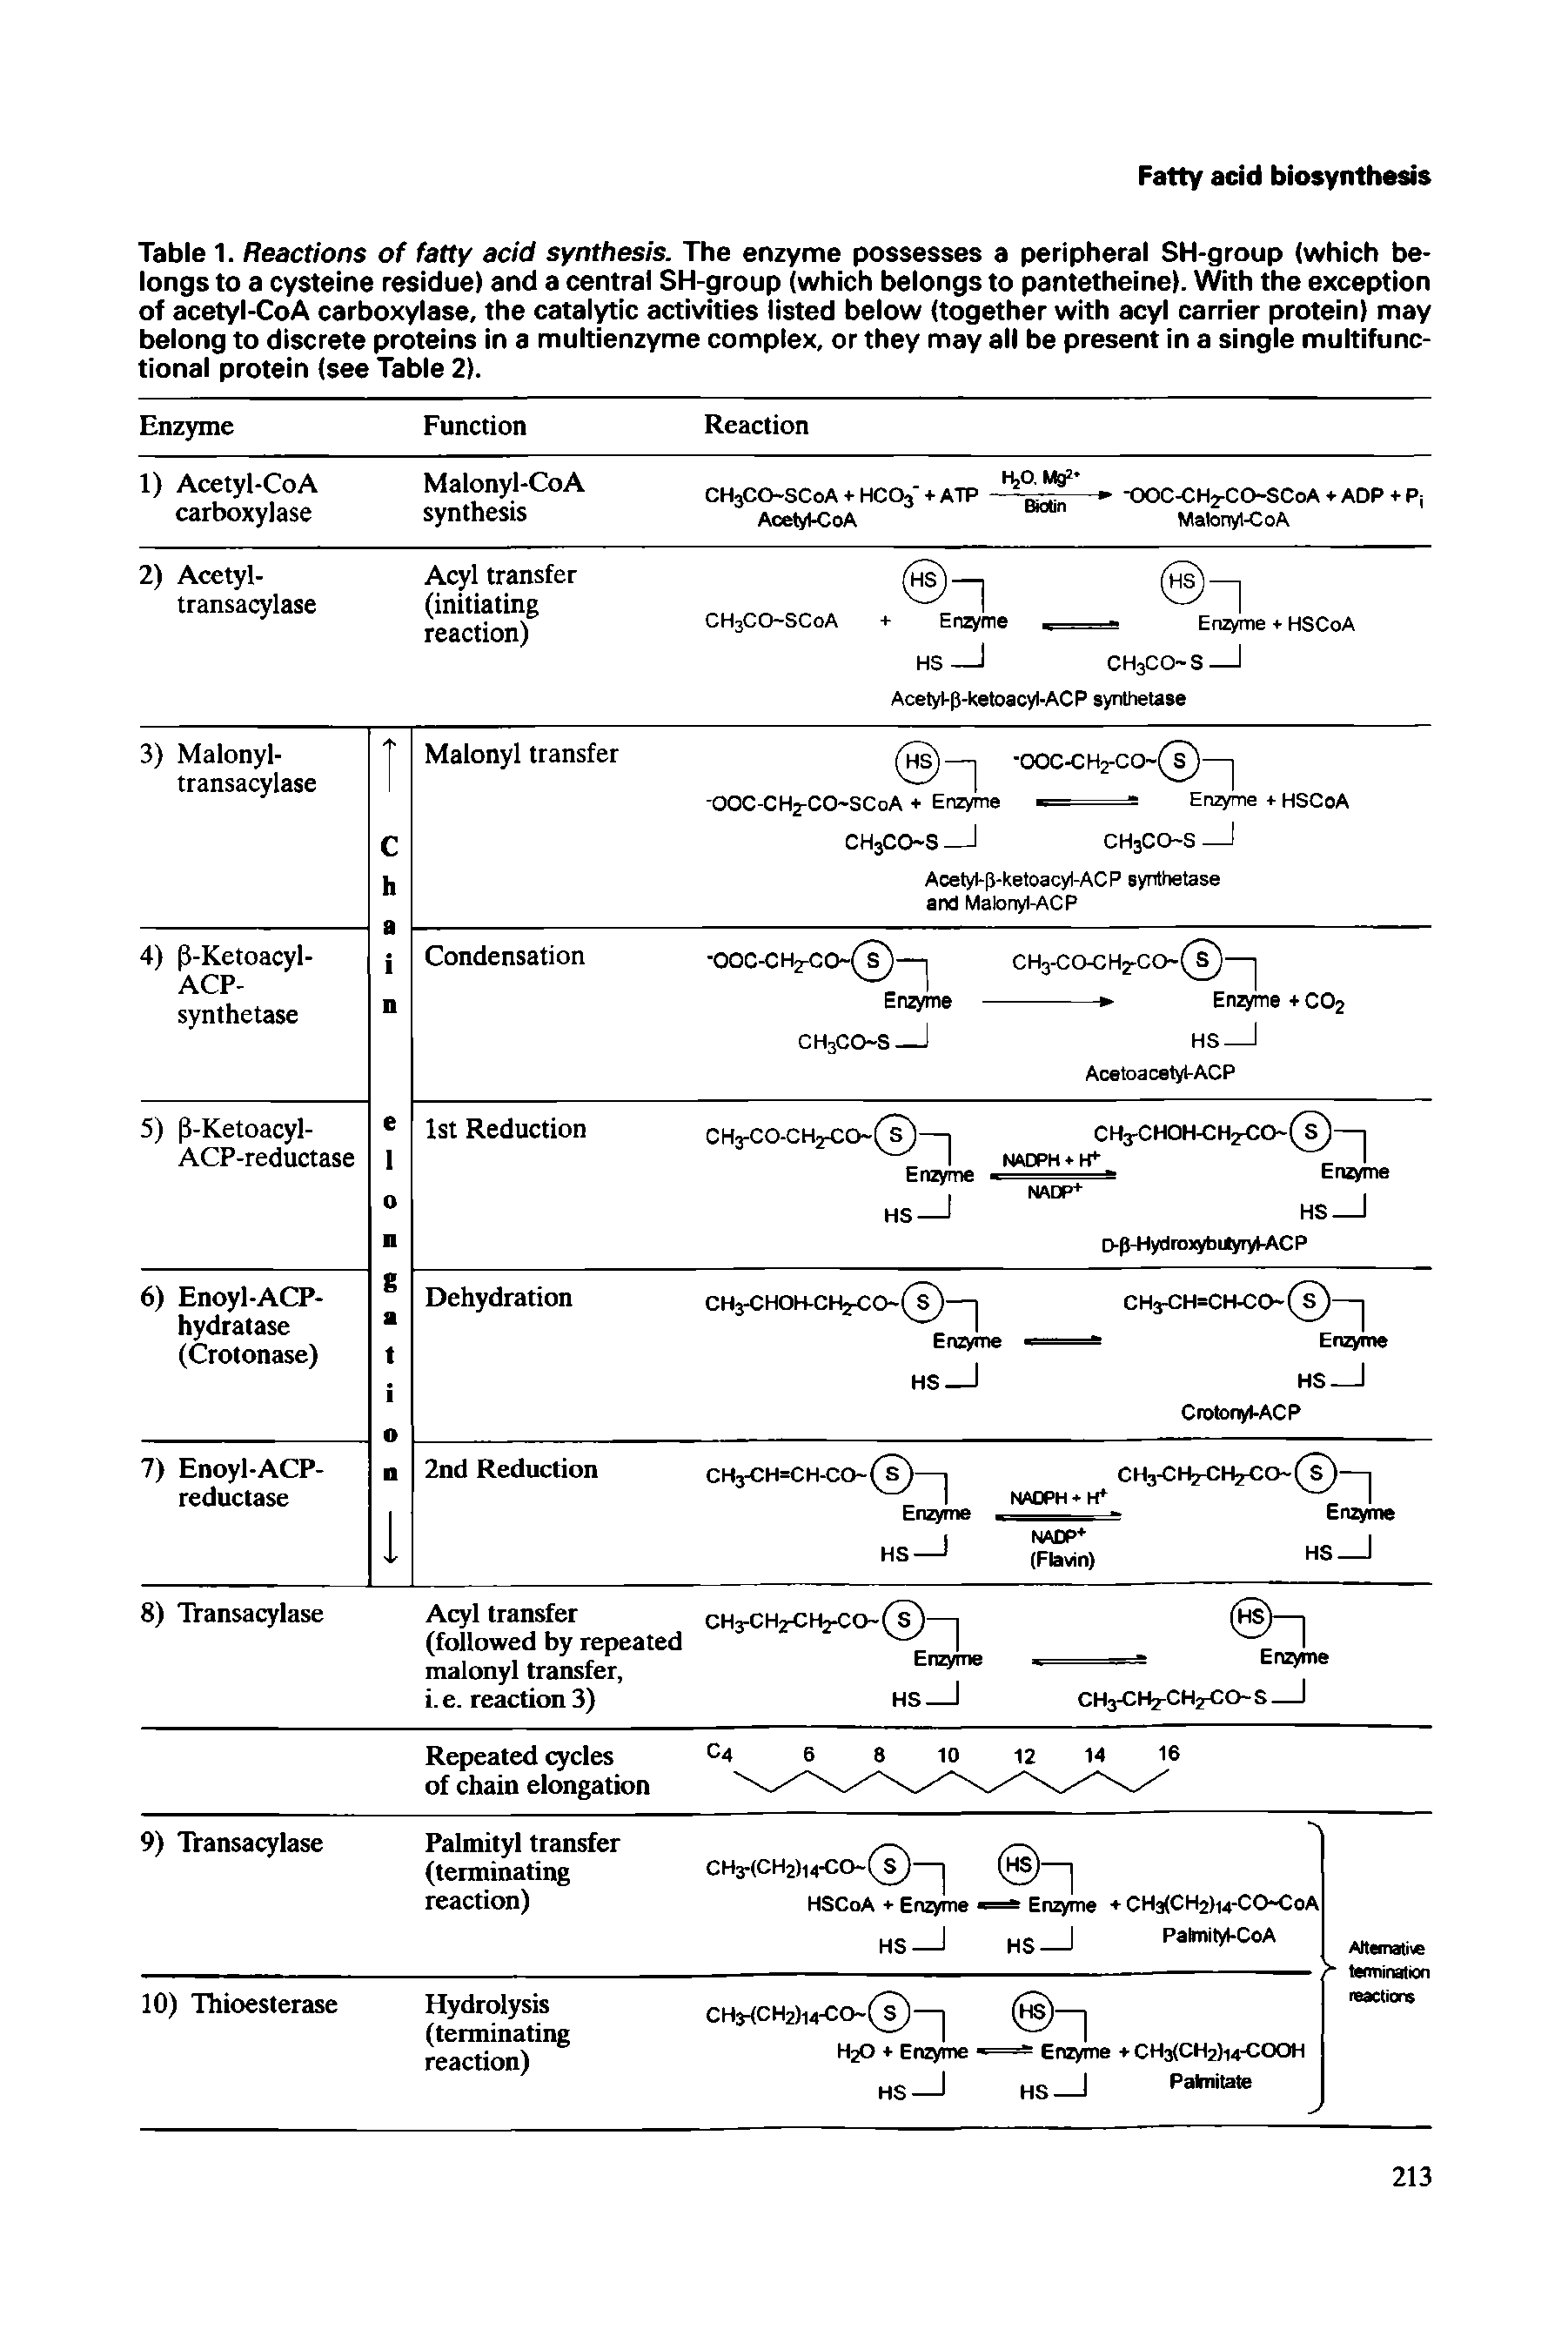 Table 1. Reactions of fatty acid synthesis. The enzyme possesses a peripheral SH-group (which belongs to a cysteine residue) and a central SH-group (which belongs to pantetheine). With the exception of acetyl-CoA carboxylase, the catalytic activities listed below (together with acyl carrier protein) may belong to discrete proteins in a multienzyme complex, or they may all be present in a single multifunctional protein (see Table 2).